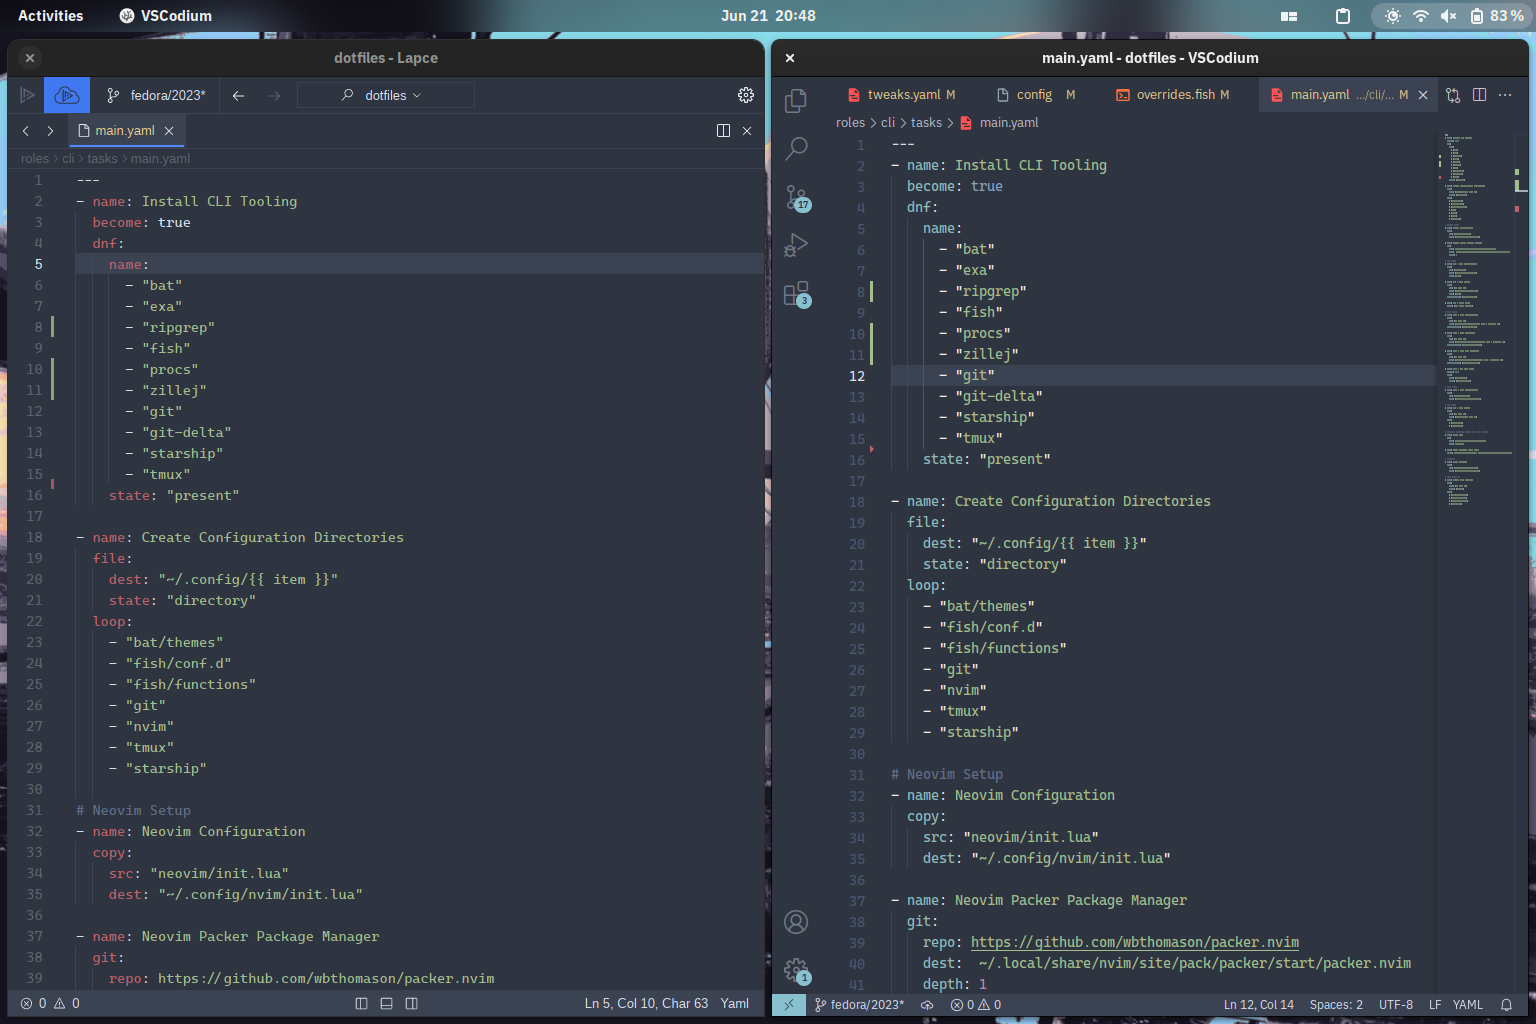 Nord theme on Lapce (left), and VSCodium (right)